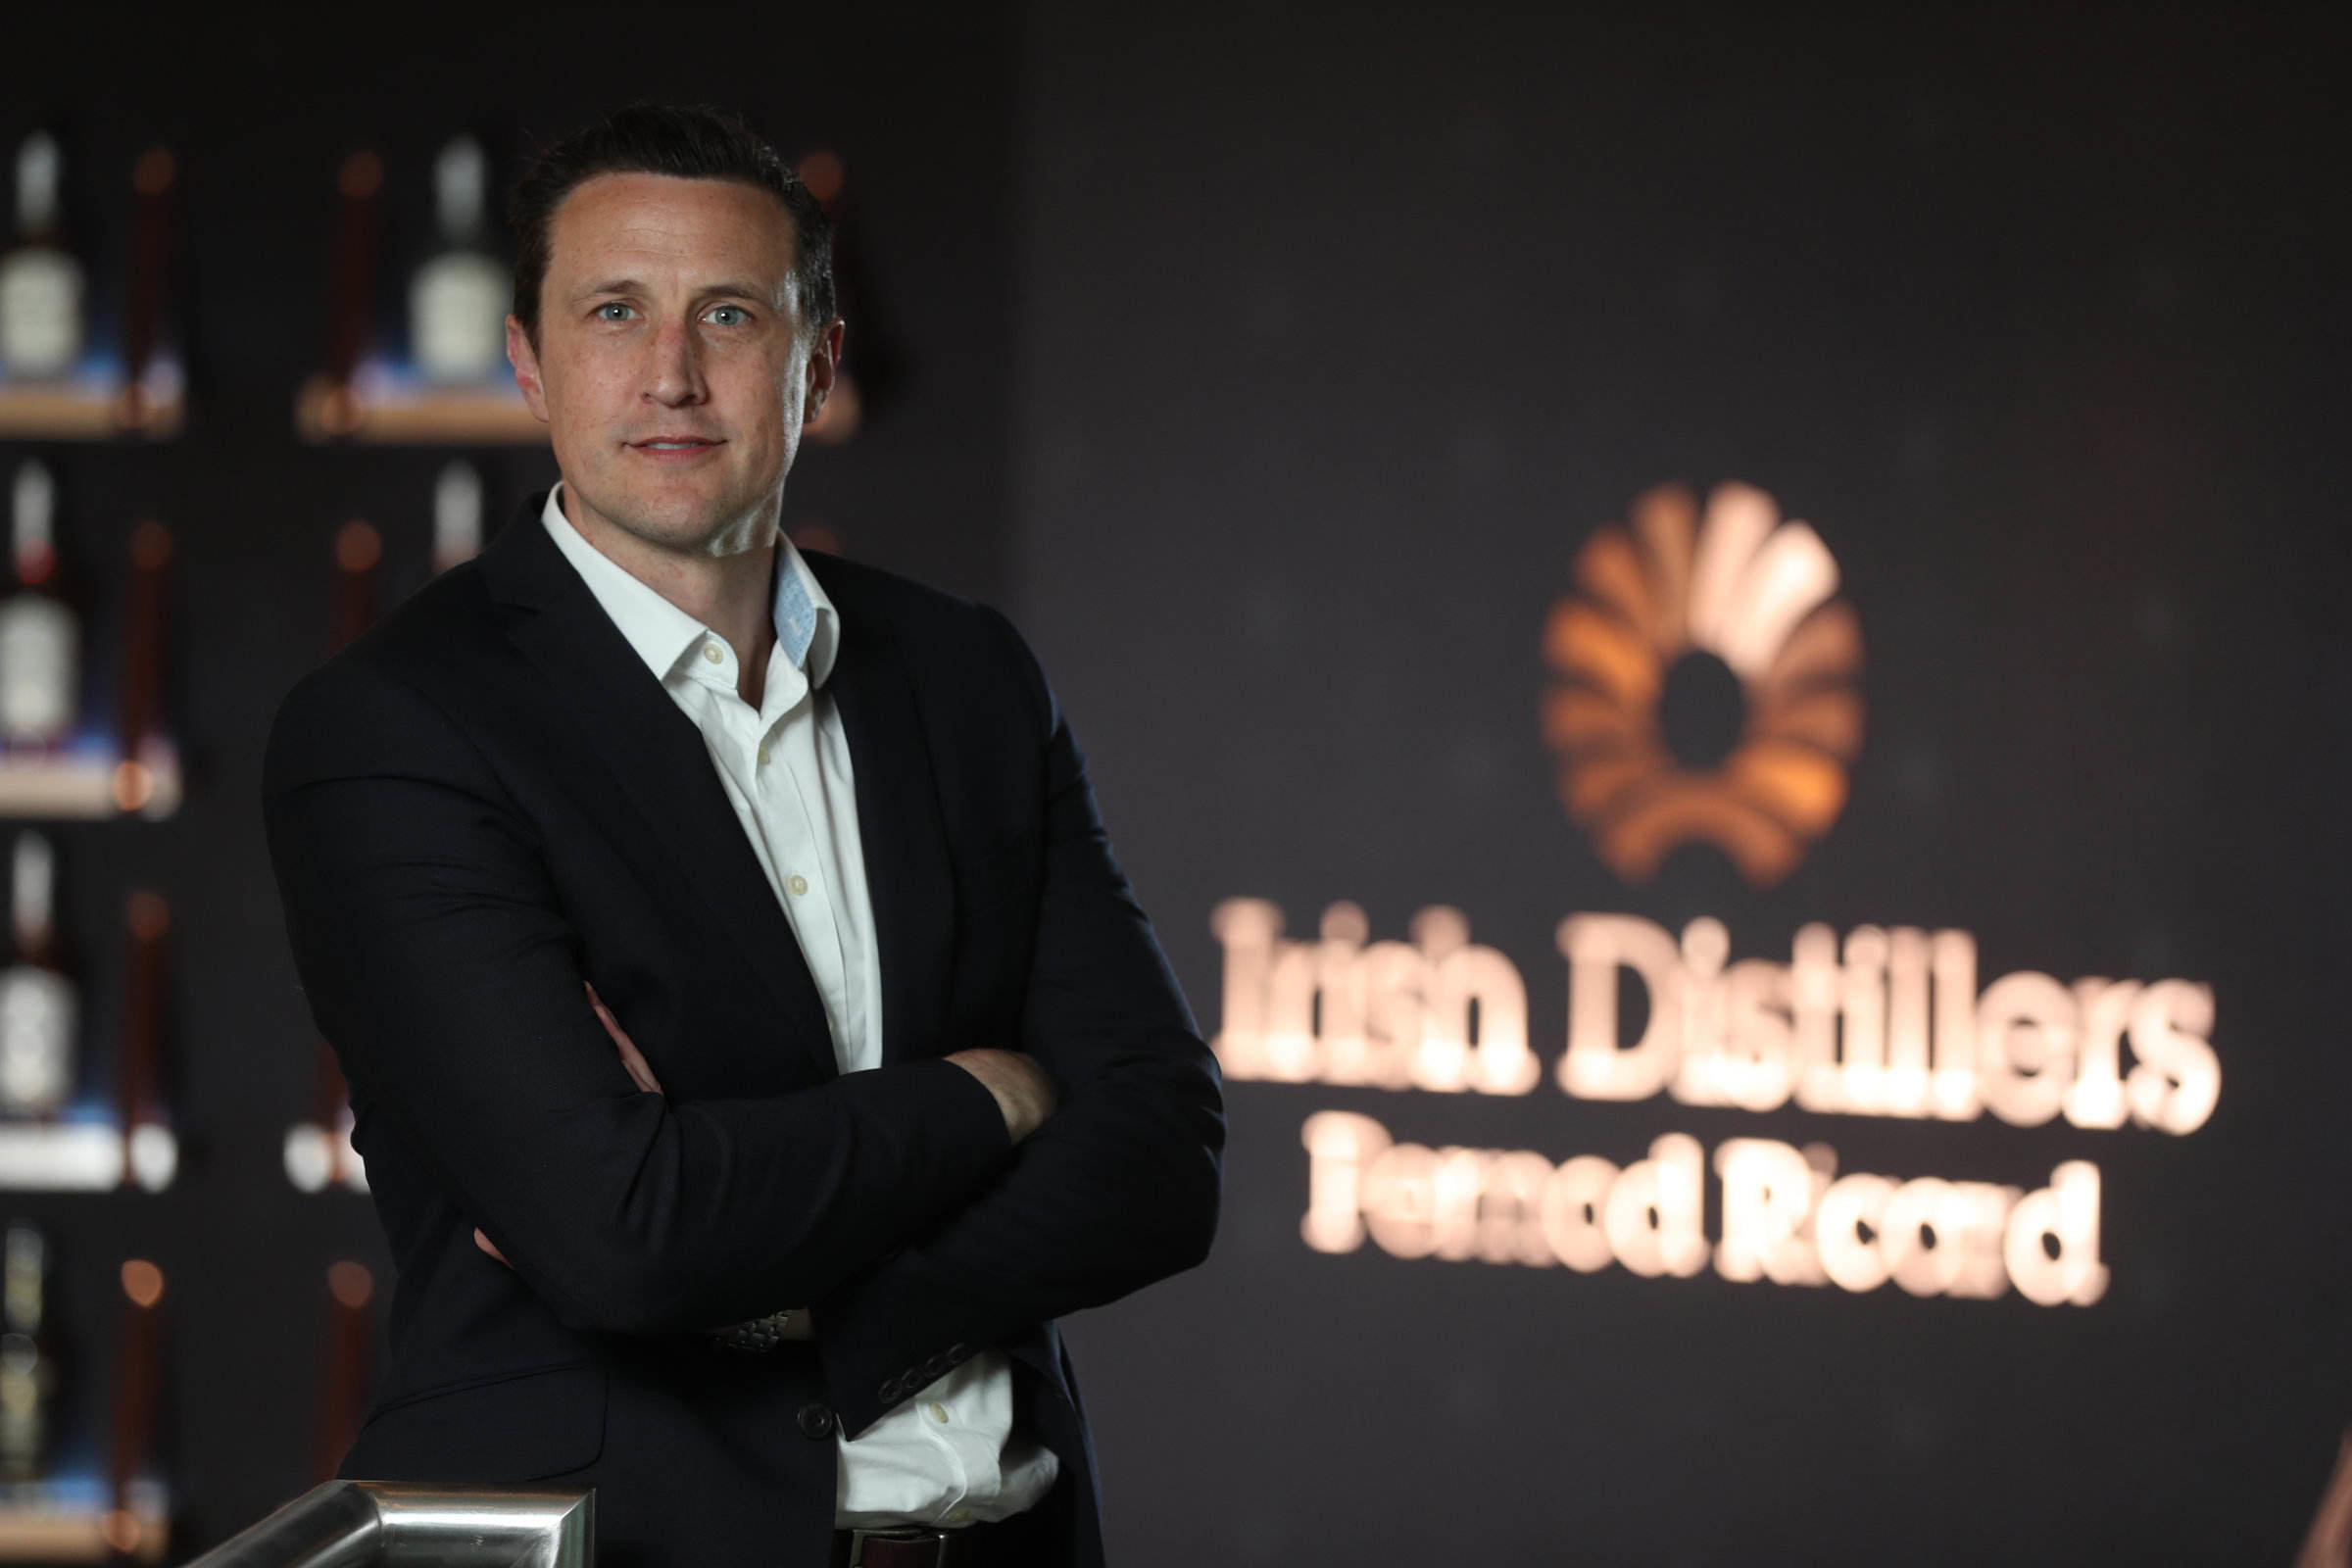 Shane Davey has moved to IDL as Head of Sales and Marketing (Prestige Brands).